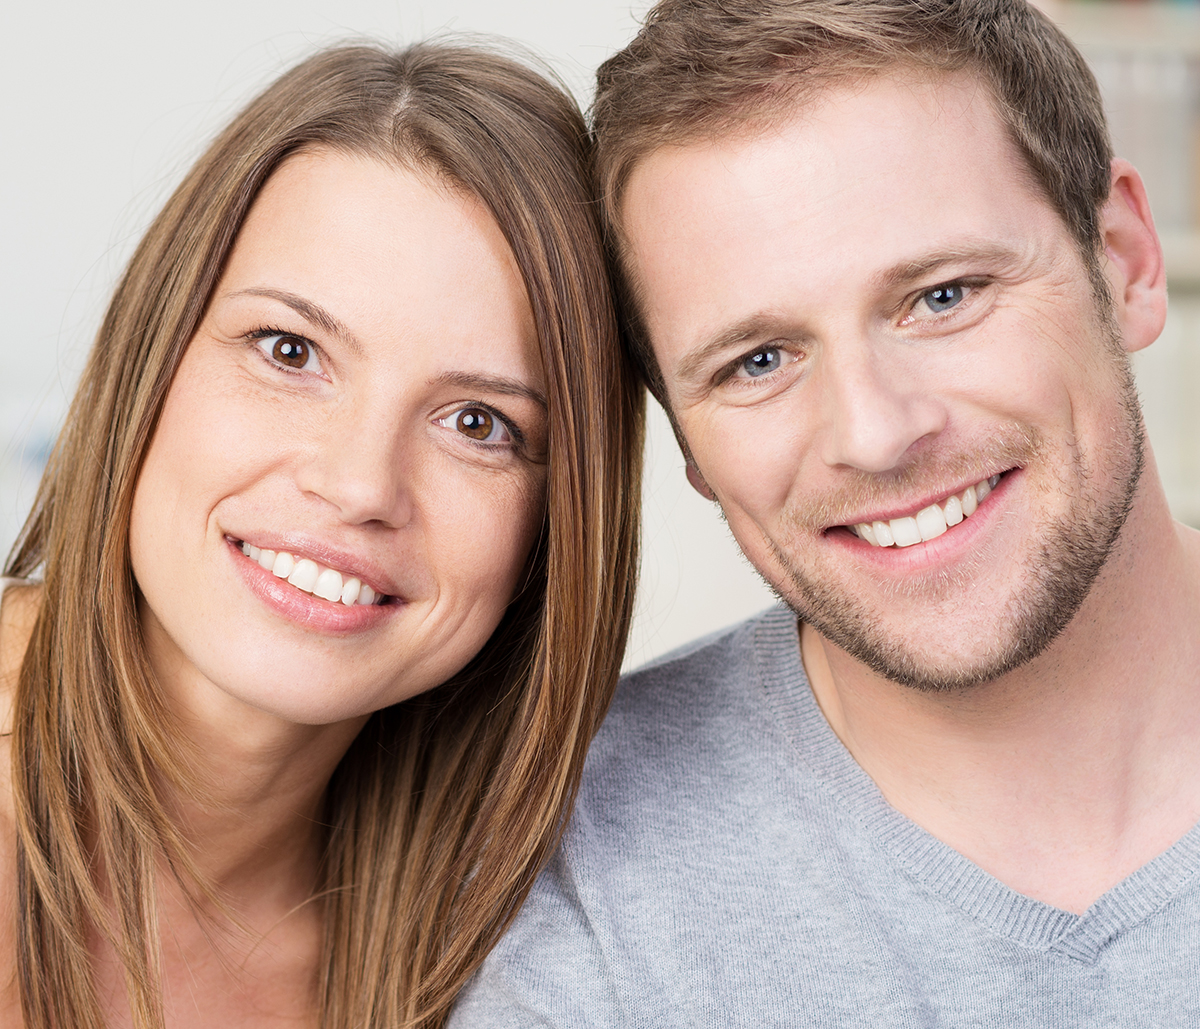 Who Can Benefit from Cosmetic Dental Procedures